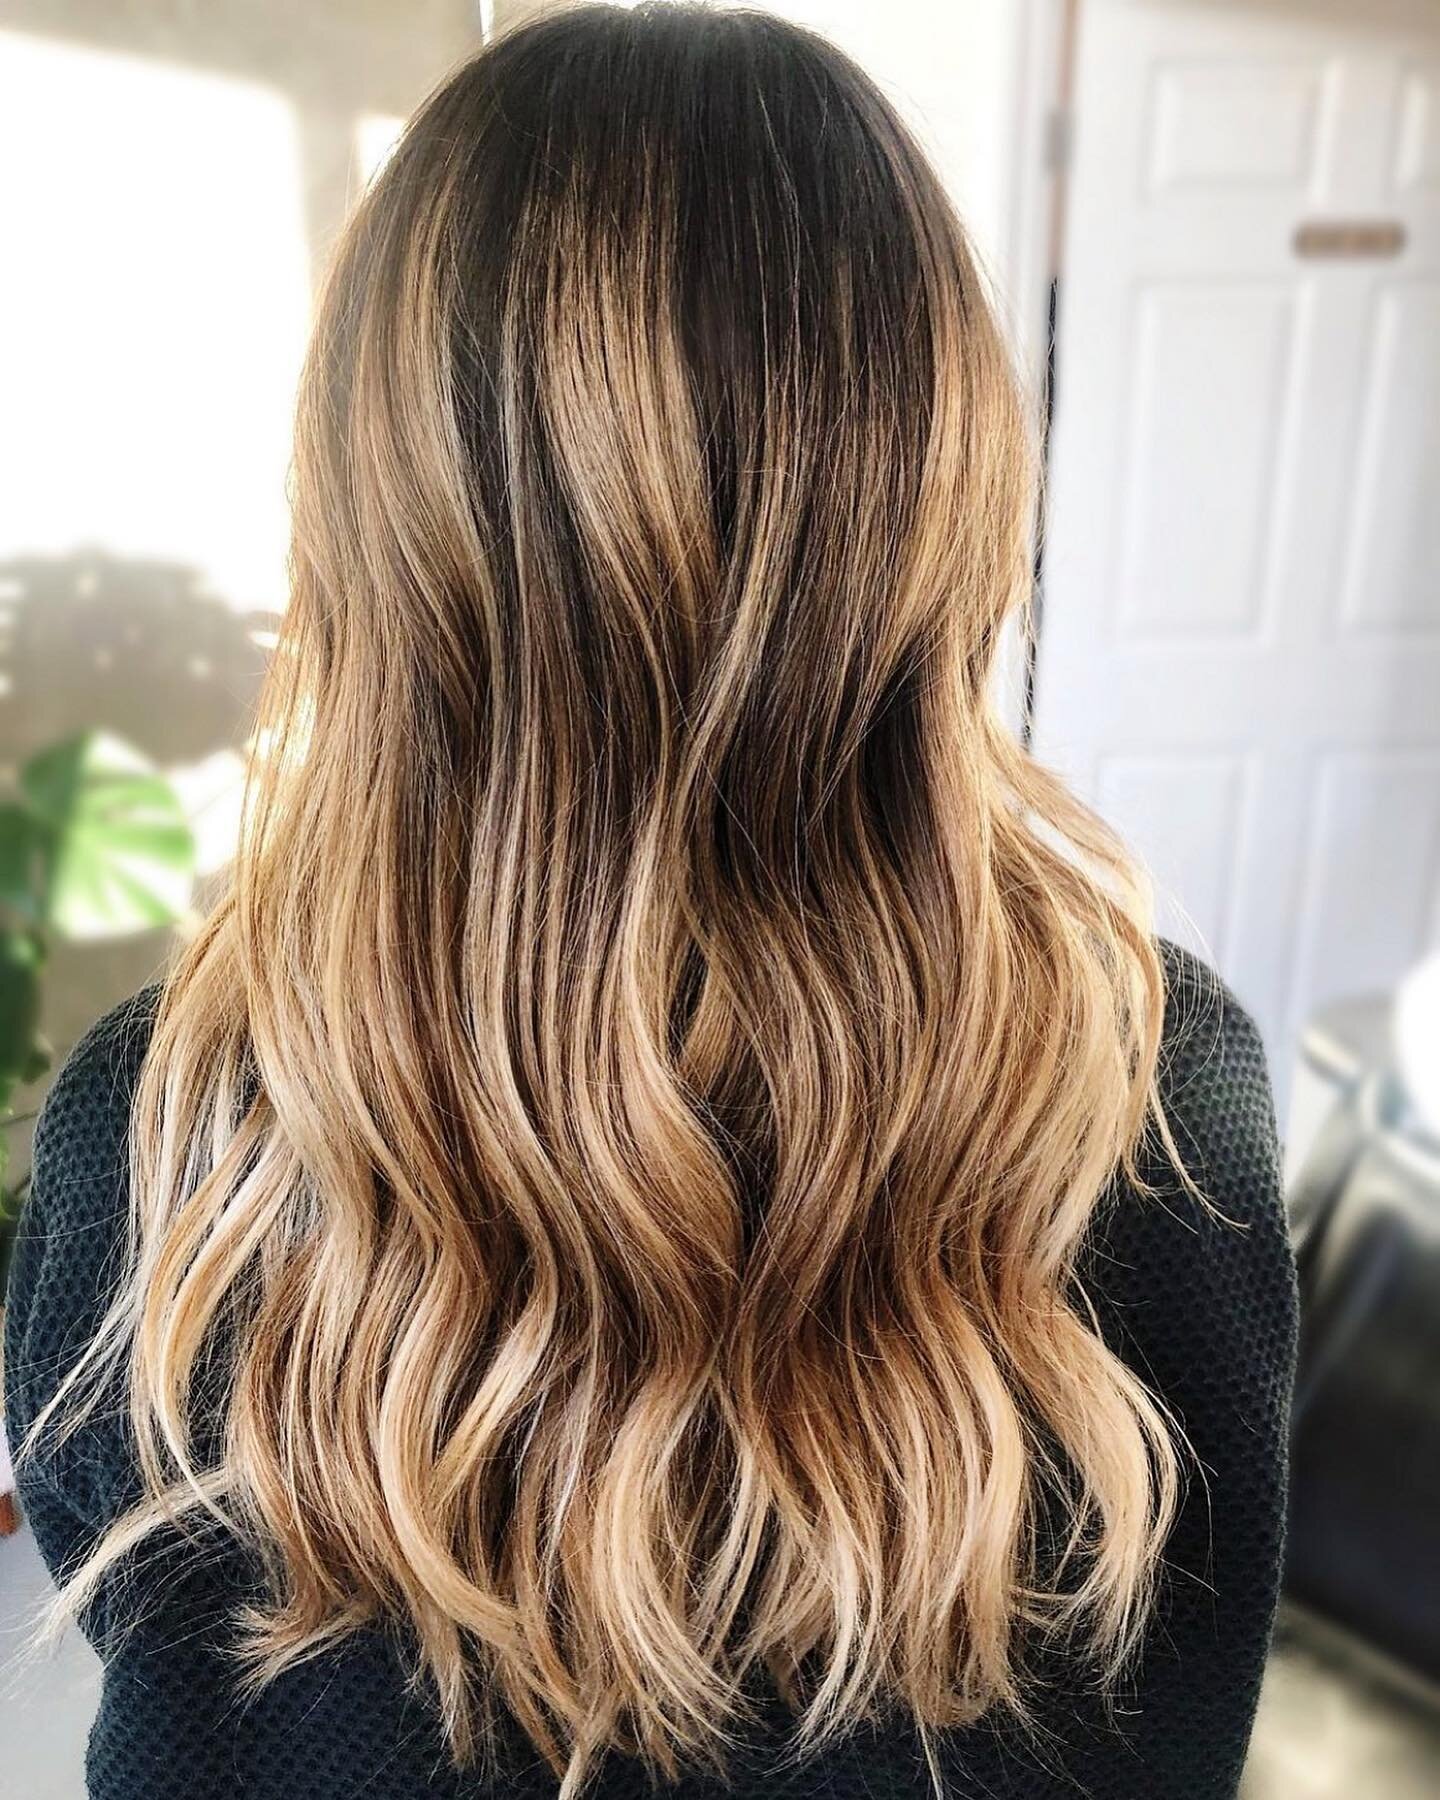 Summer balayage with @sarah.s.hair 🌻 warmer tones are in this season and we are loving it! 🌞